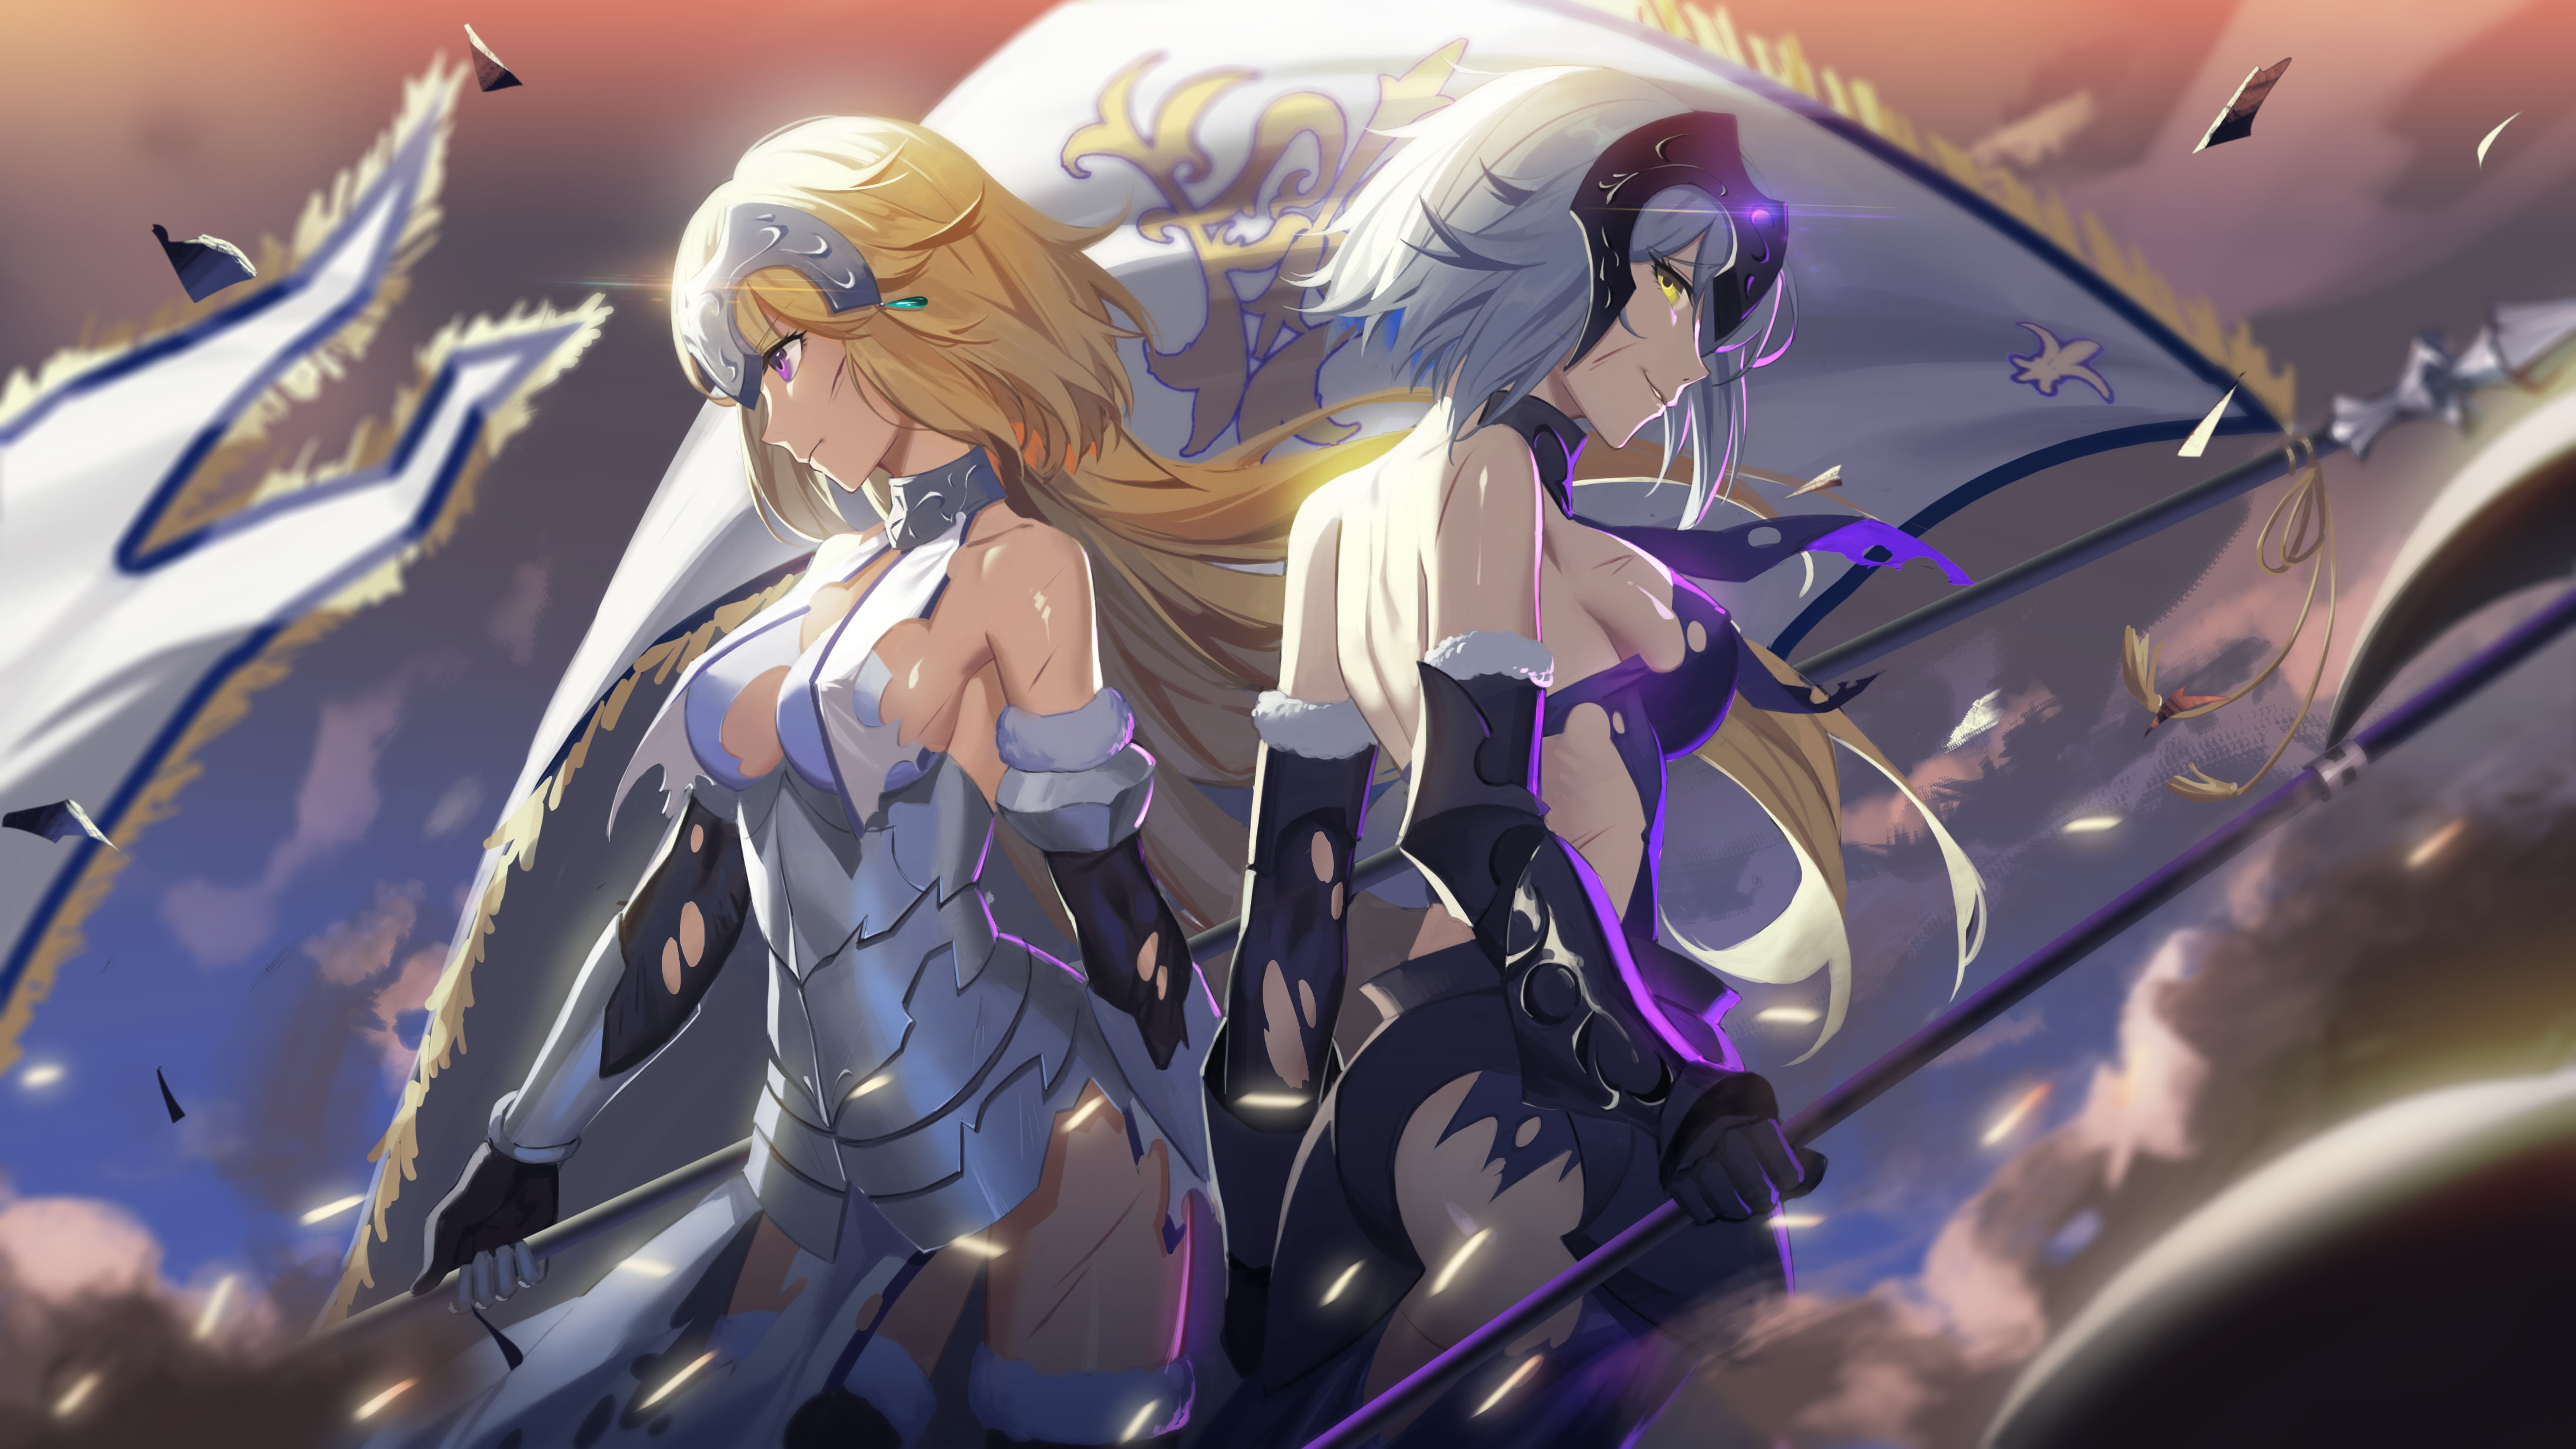 two white and yellow haired women anime characters wallpaper